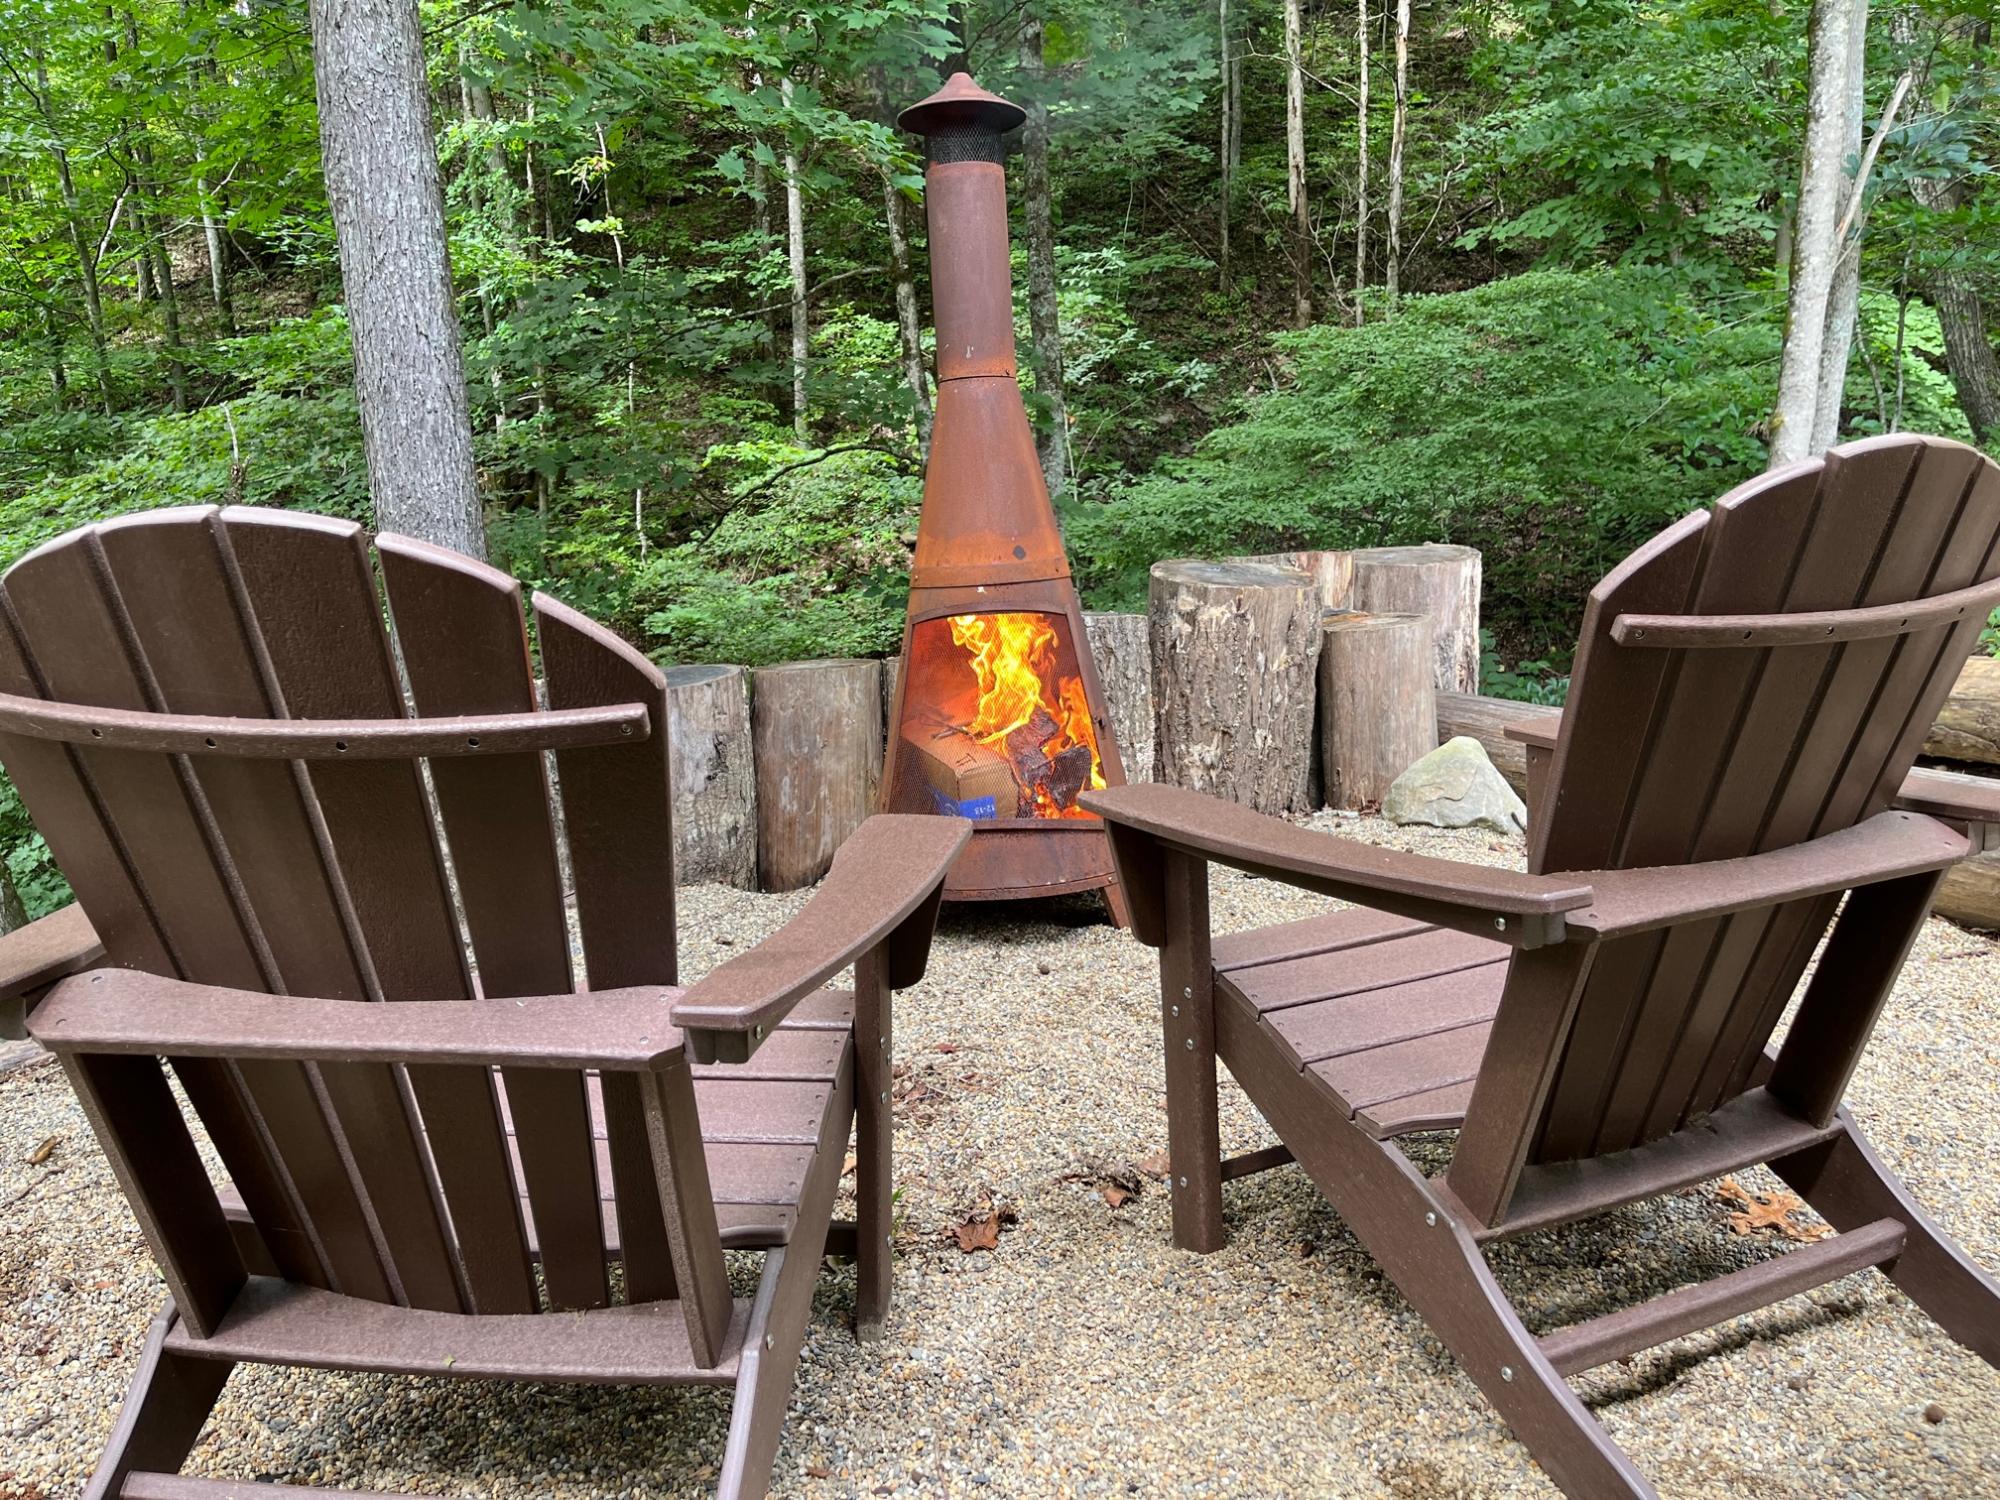 Private Chiminea and Chairs - The Enchanted Forest at Mountain Shire